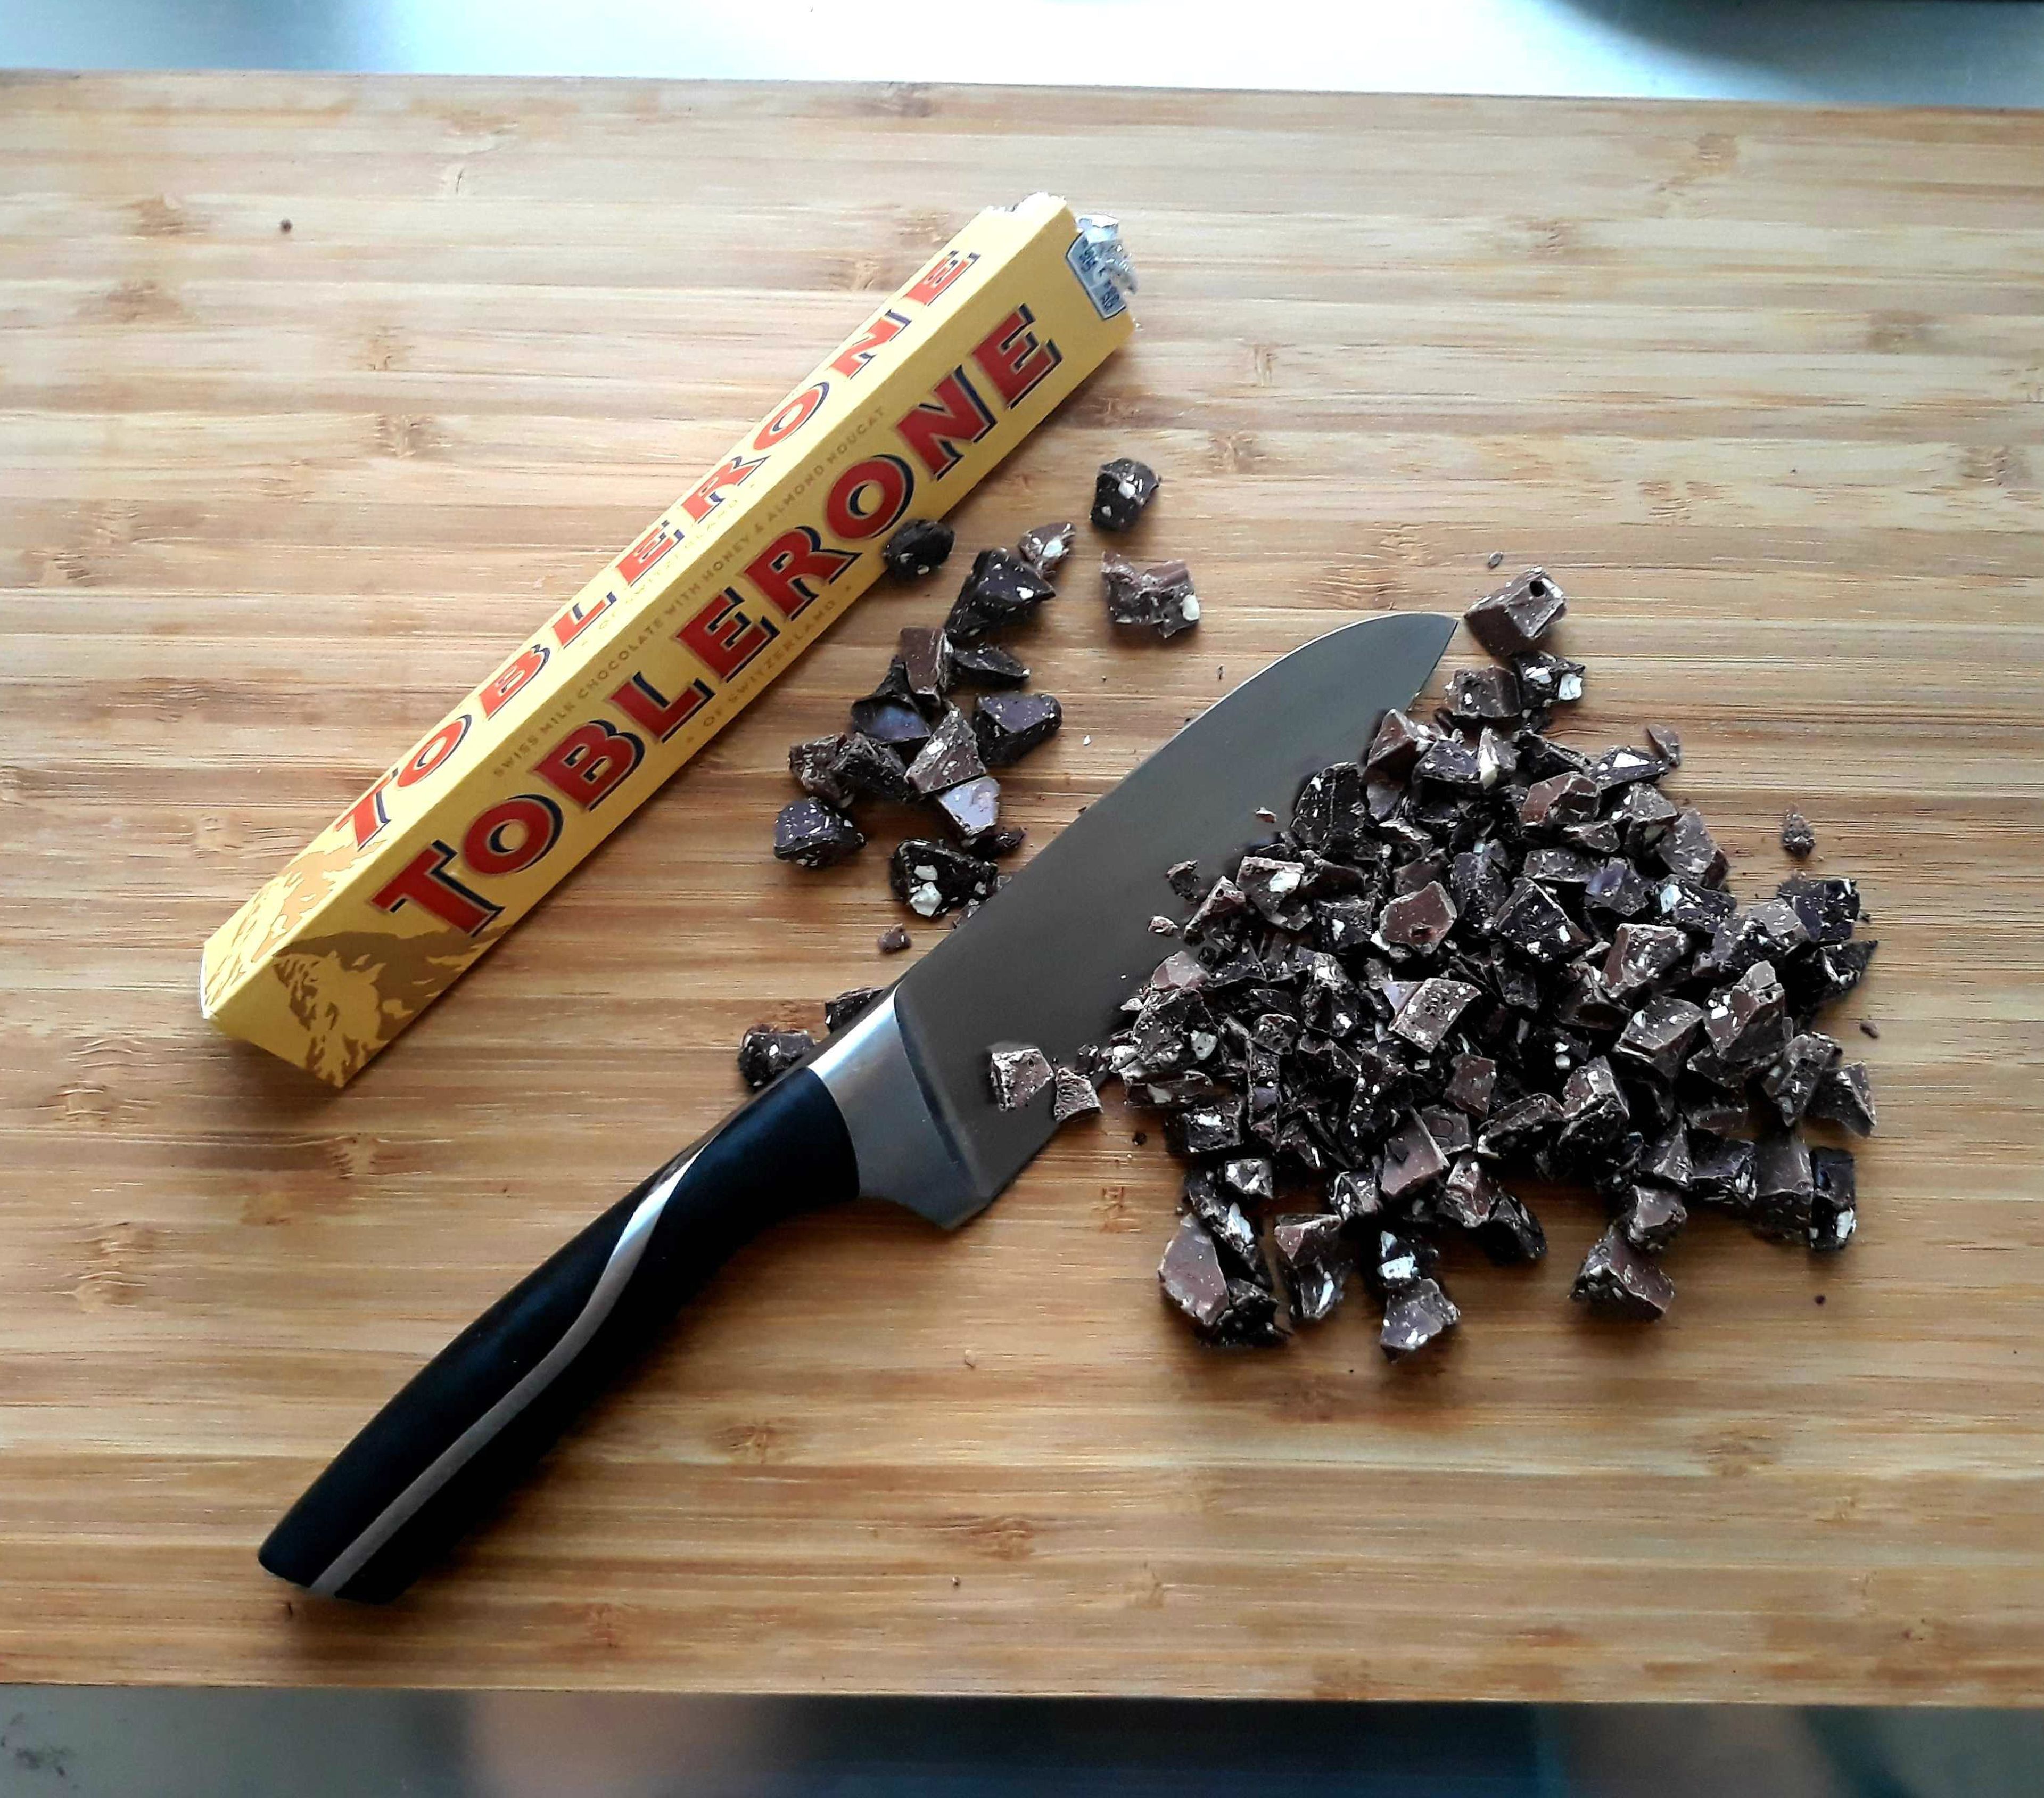 Roughly chop "Toblerone" or any chocolate of your choice. Fold the choppped chocolate into the dough. Preheat oven to 190°C/375°F.